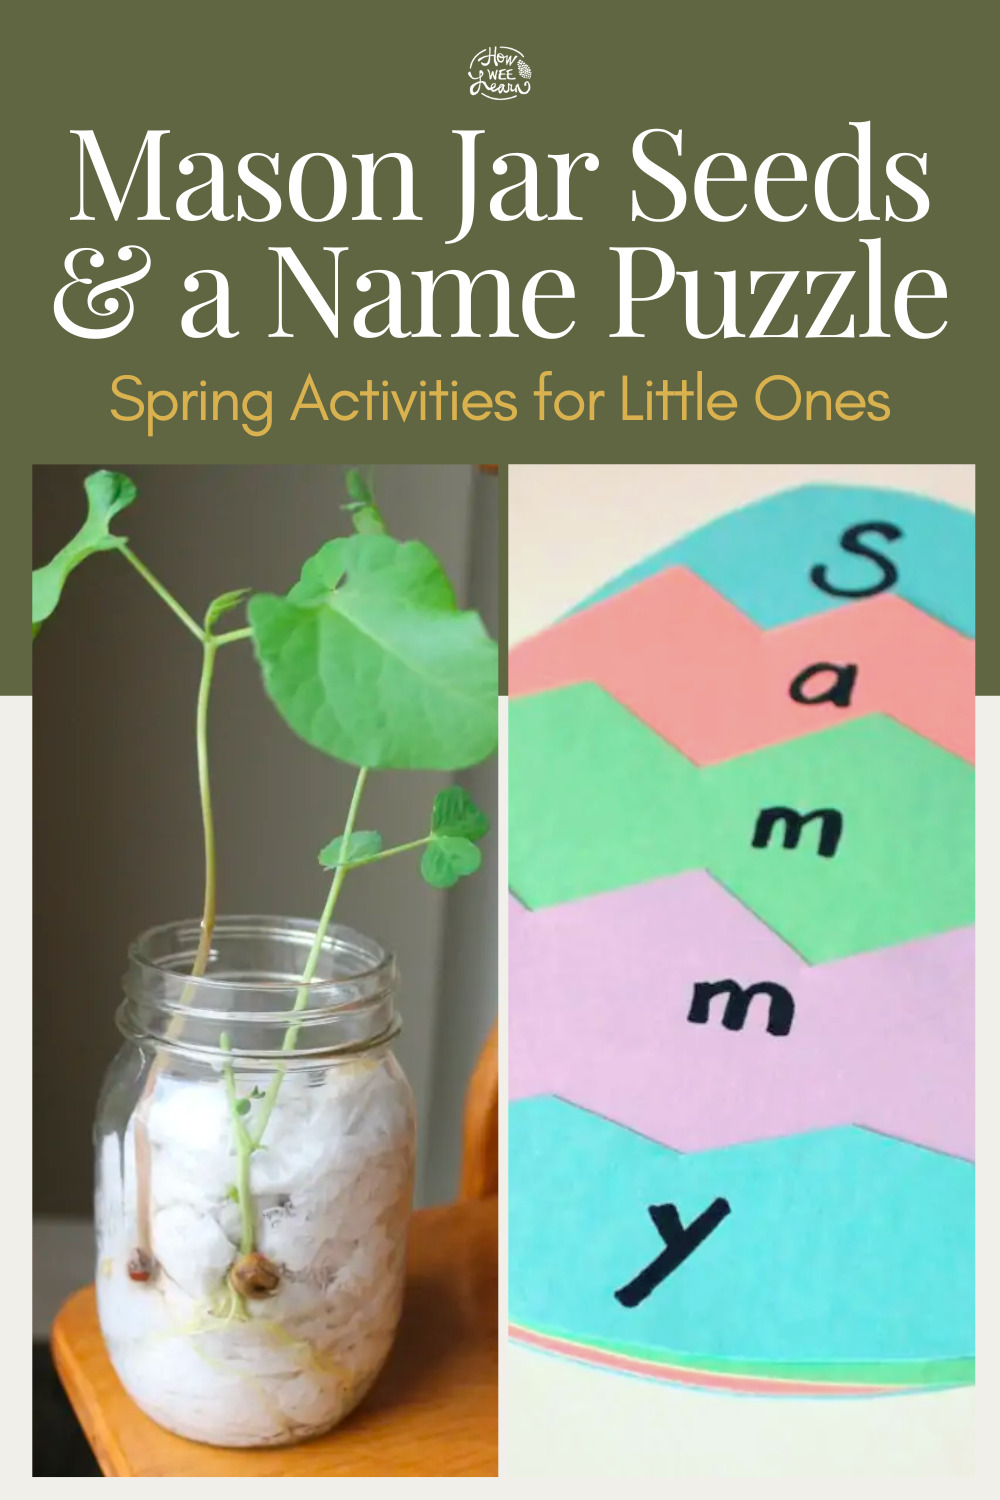 Mason Jar Seeds and a Name Puzzle